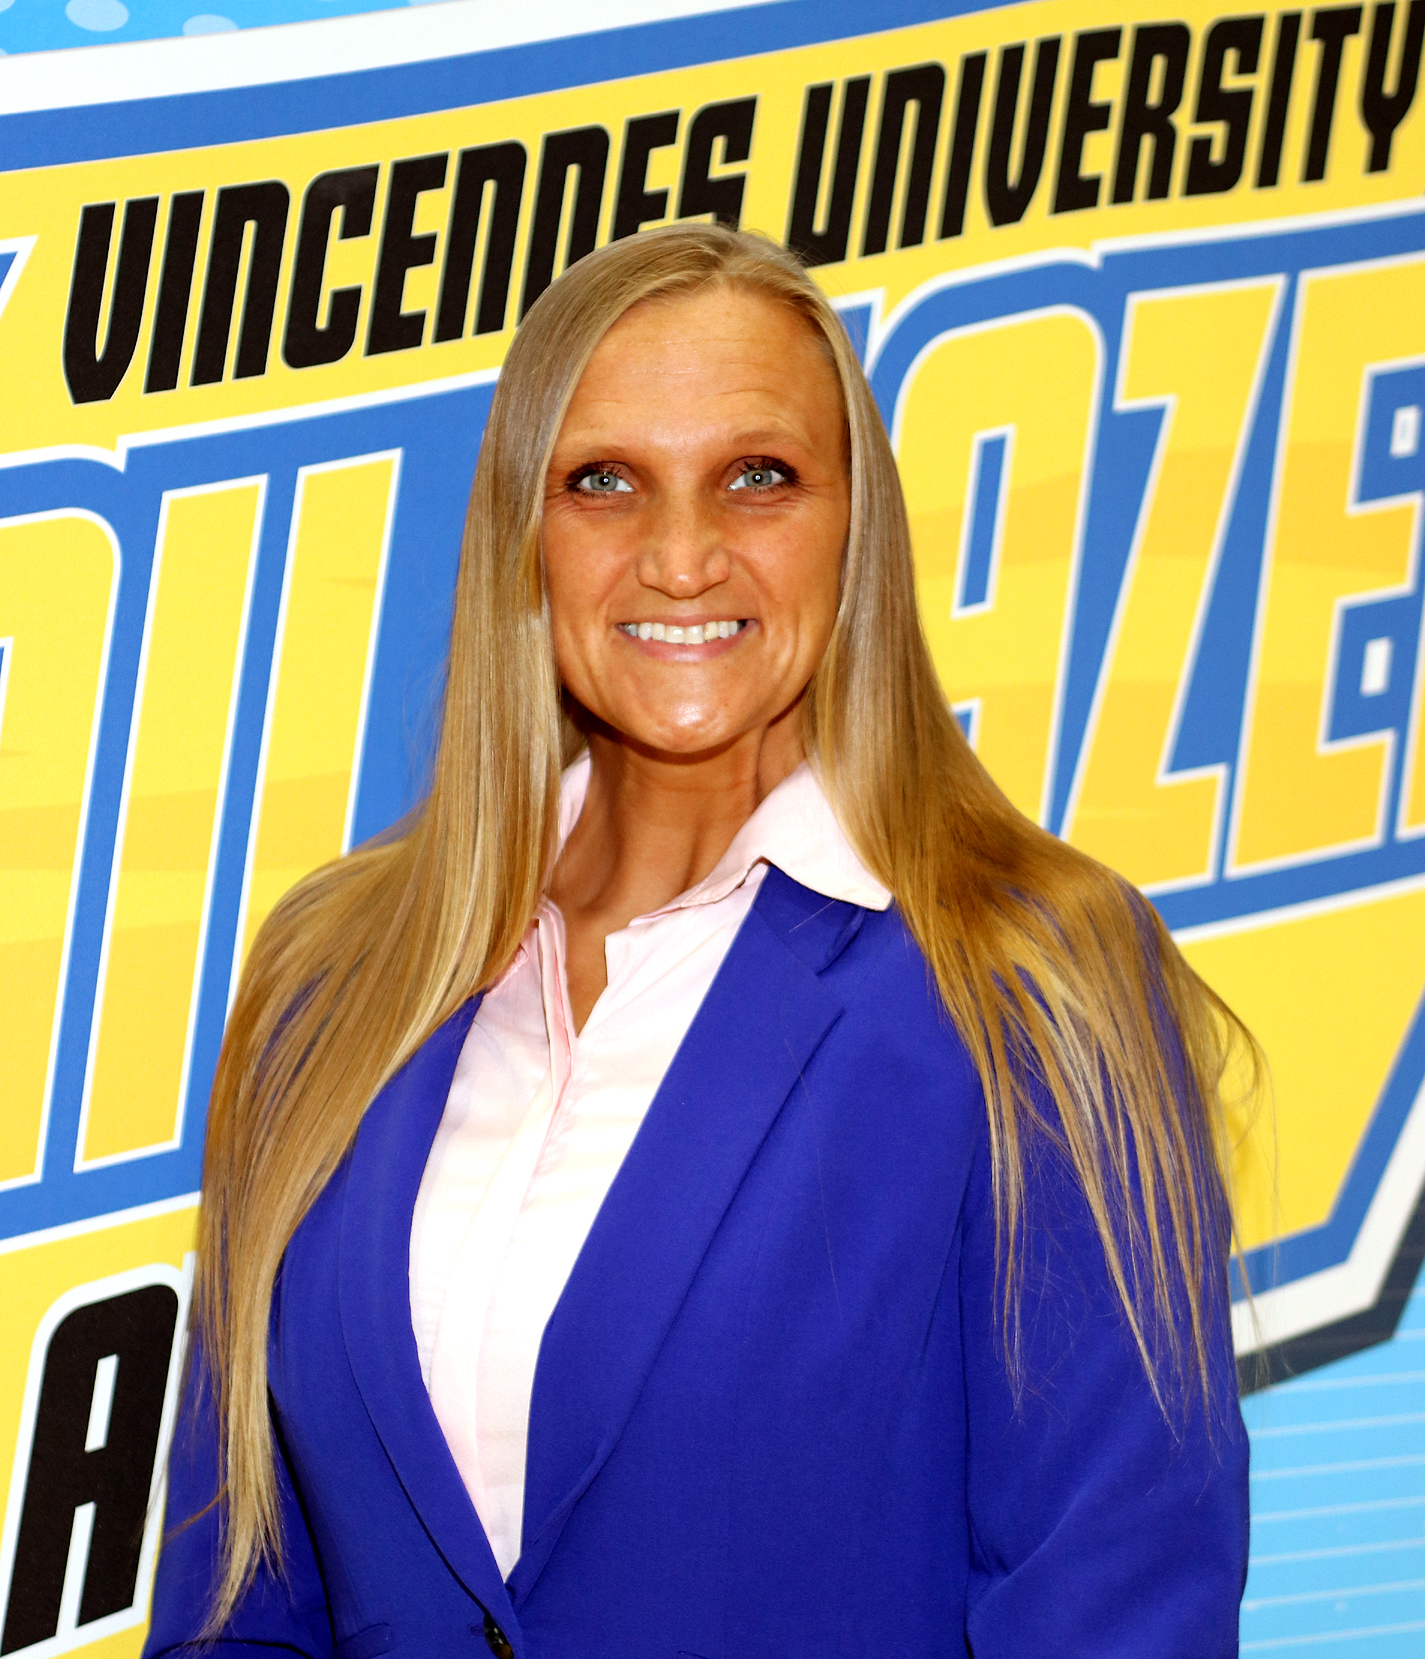 A headshot of Ingrida Hartsfield wearing professional clothing and standing with a VU Athletics step and repeat in the background.